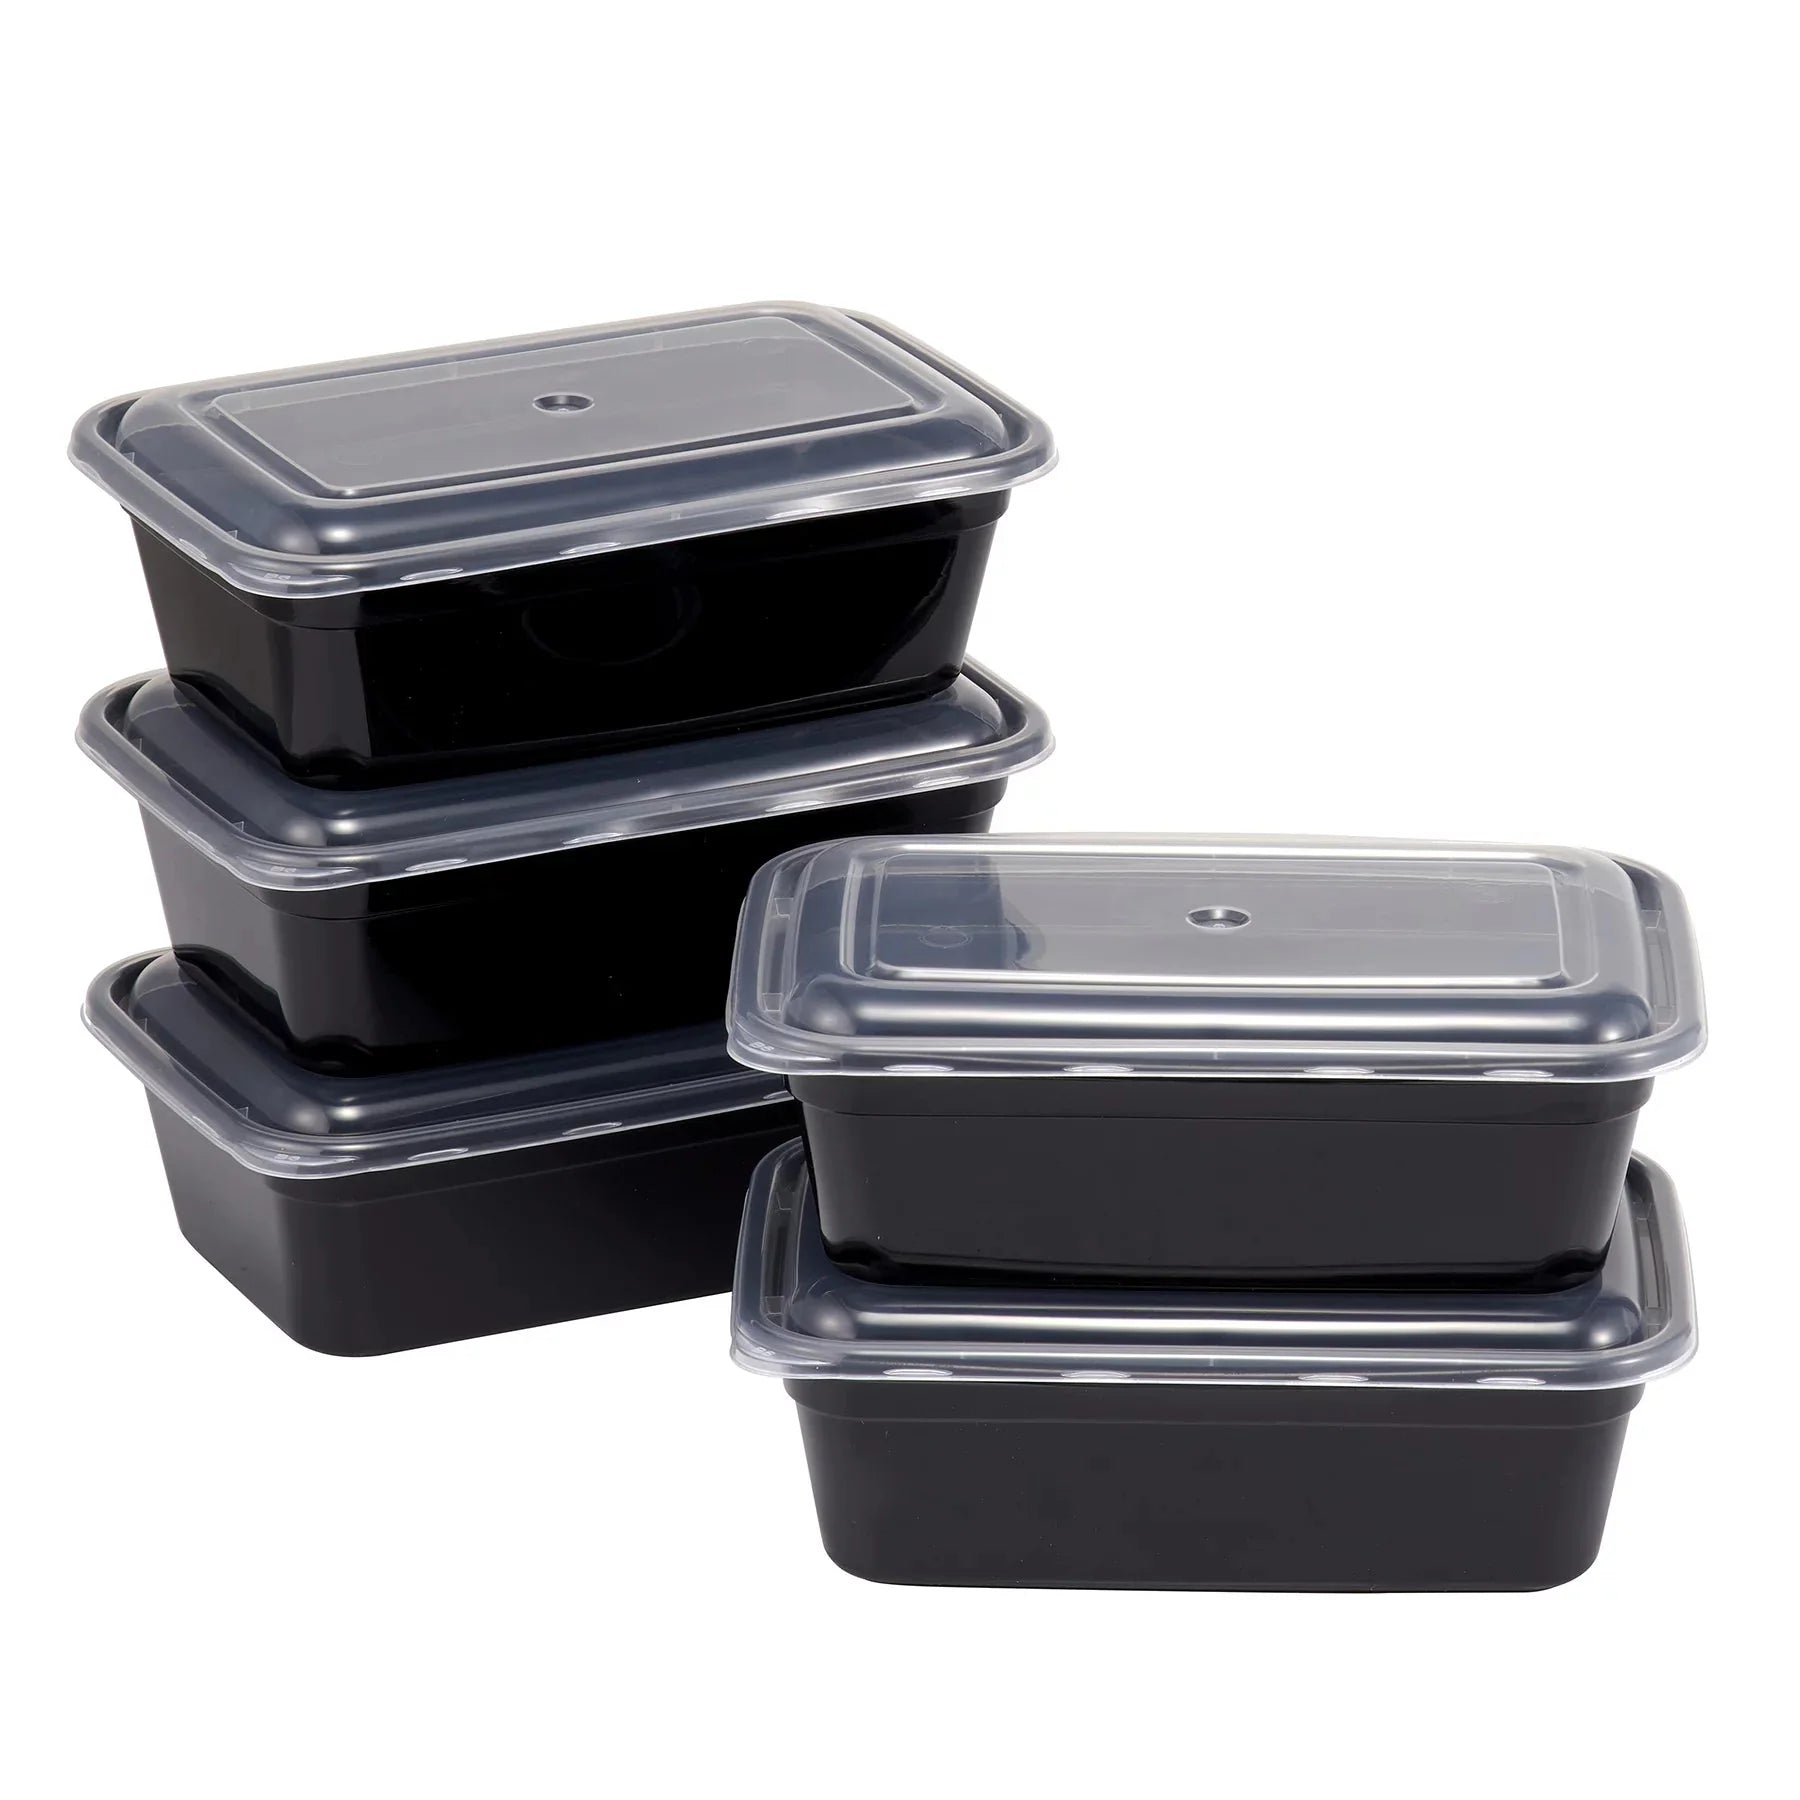 Wholesale prices with free shipping all over United States Mainstays 3 Cup Snack Meal Prep Container, 5 Pack - Steven Deals